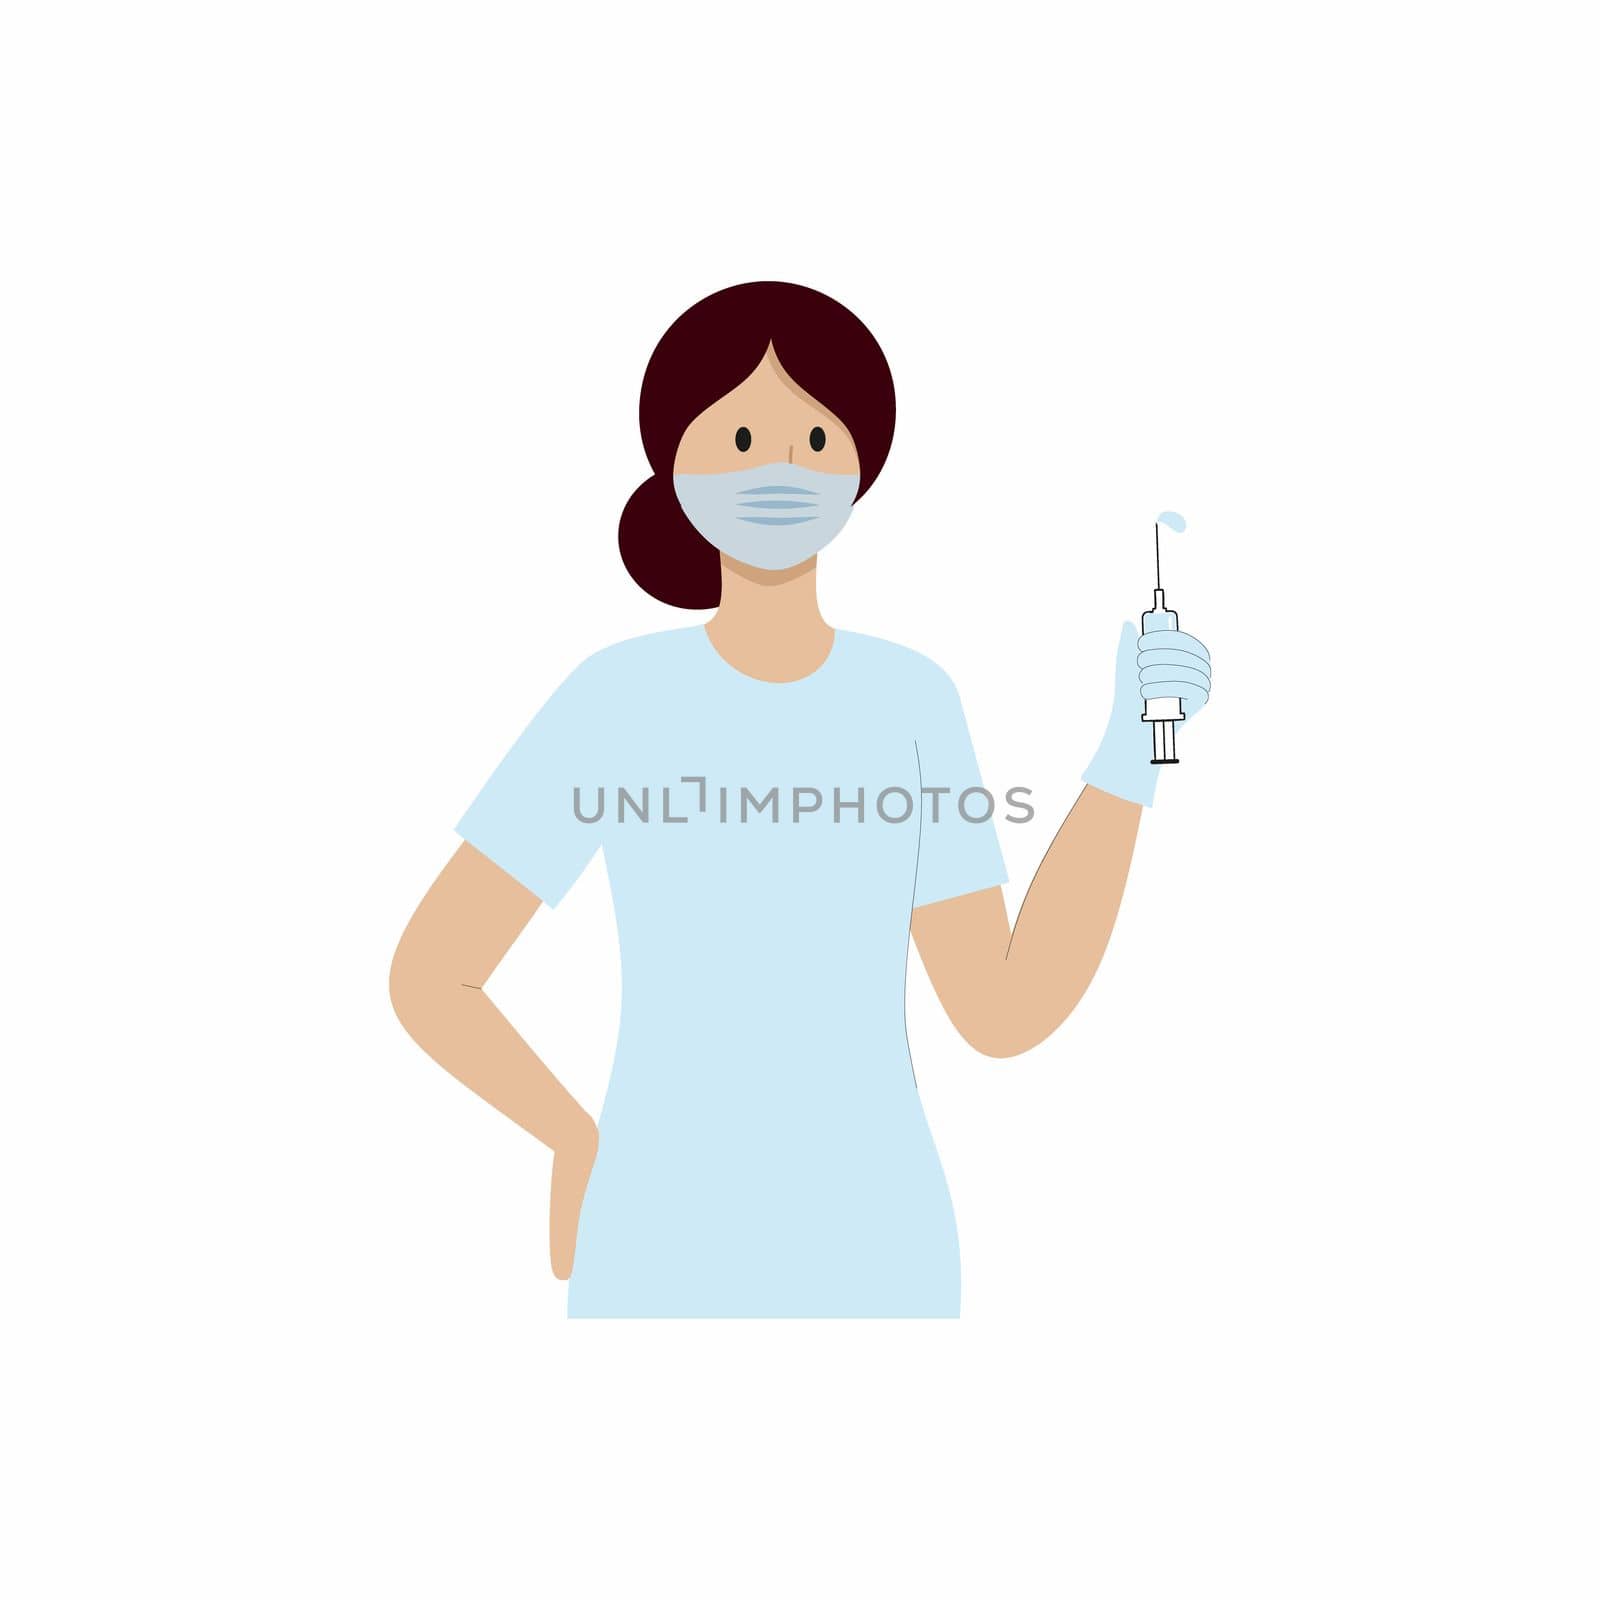 A nurse holds an injection for diseases. Vector flat cartoon illustration. The concept of coronavirus, pandemics and treatment of diseases. Infographics for the hospital's app or website.